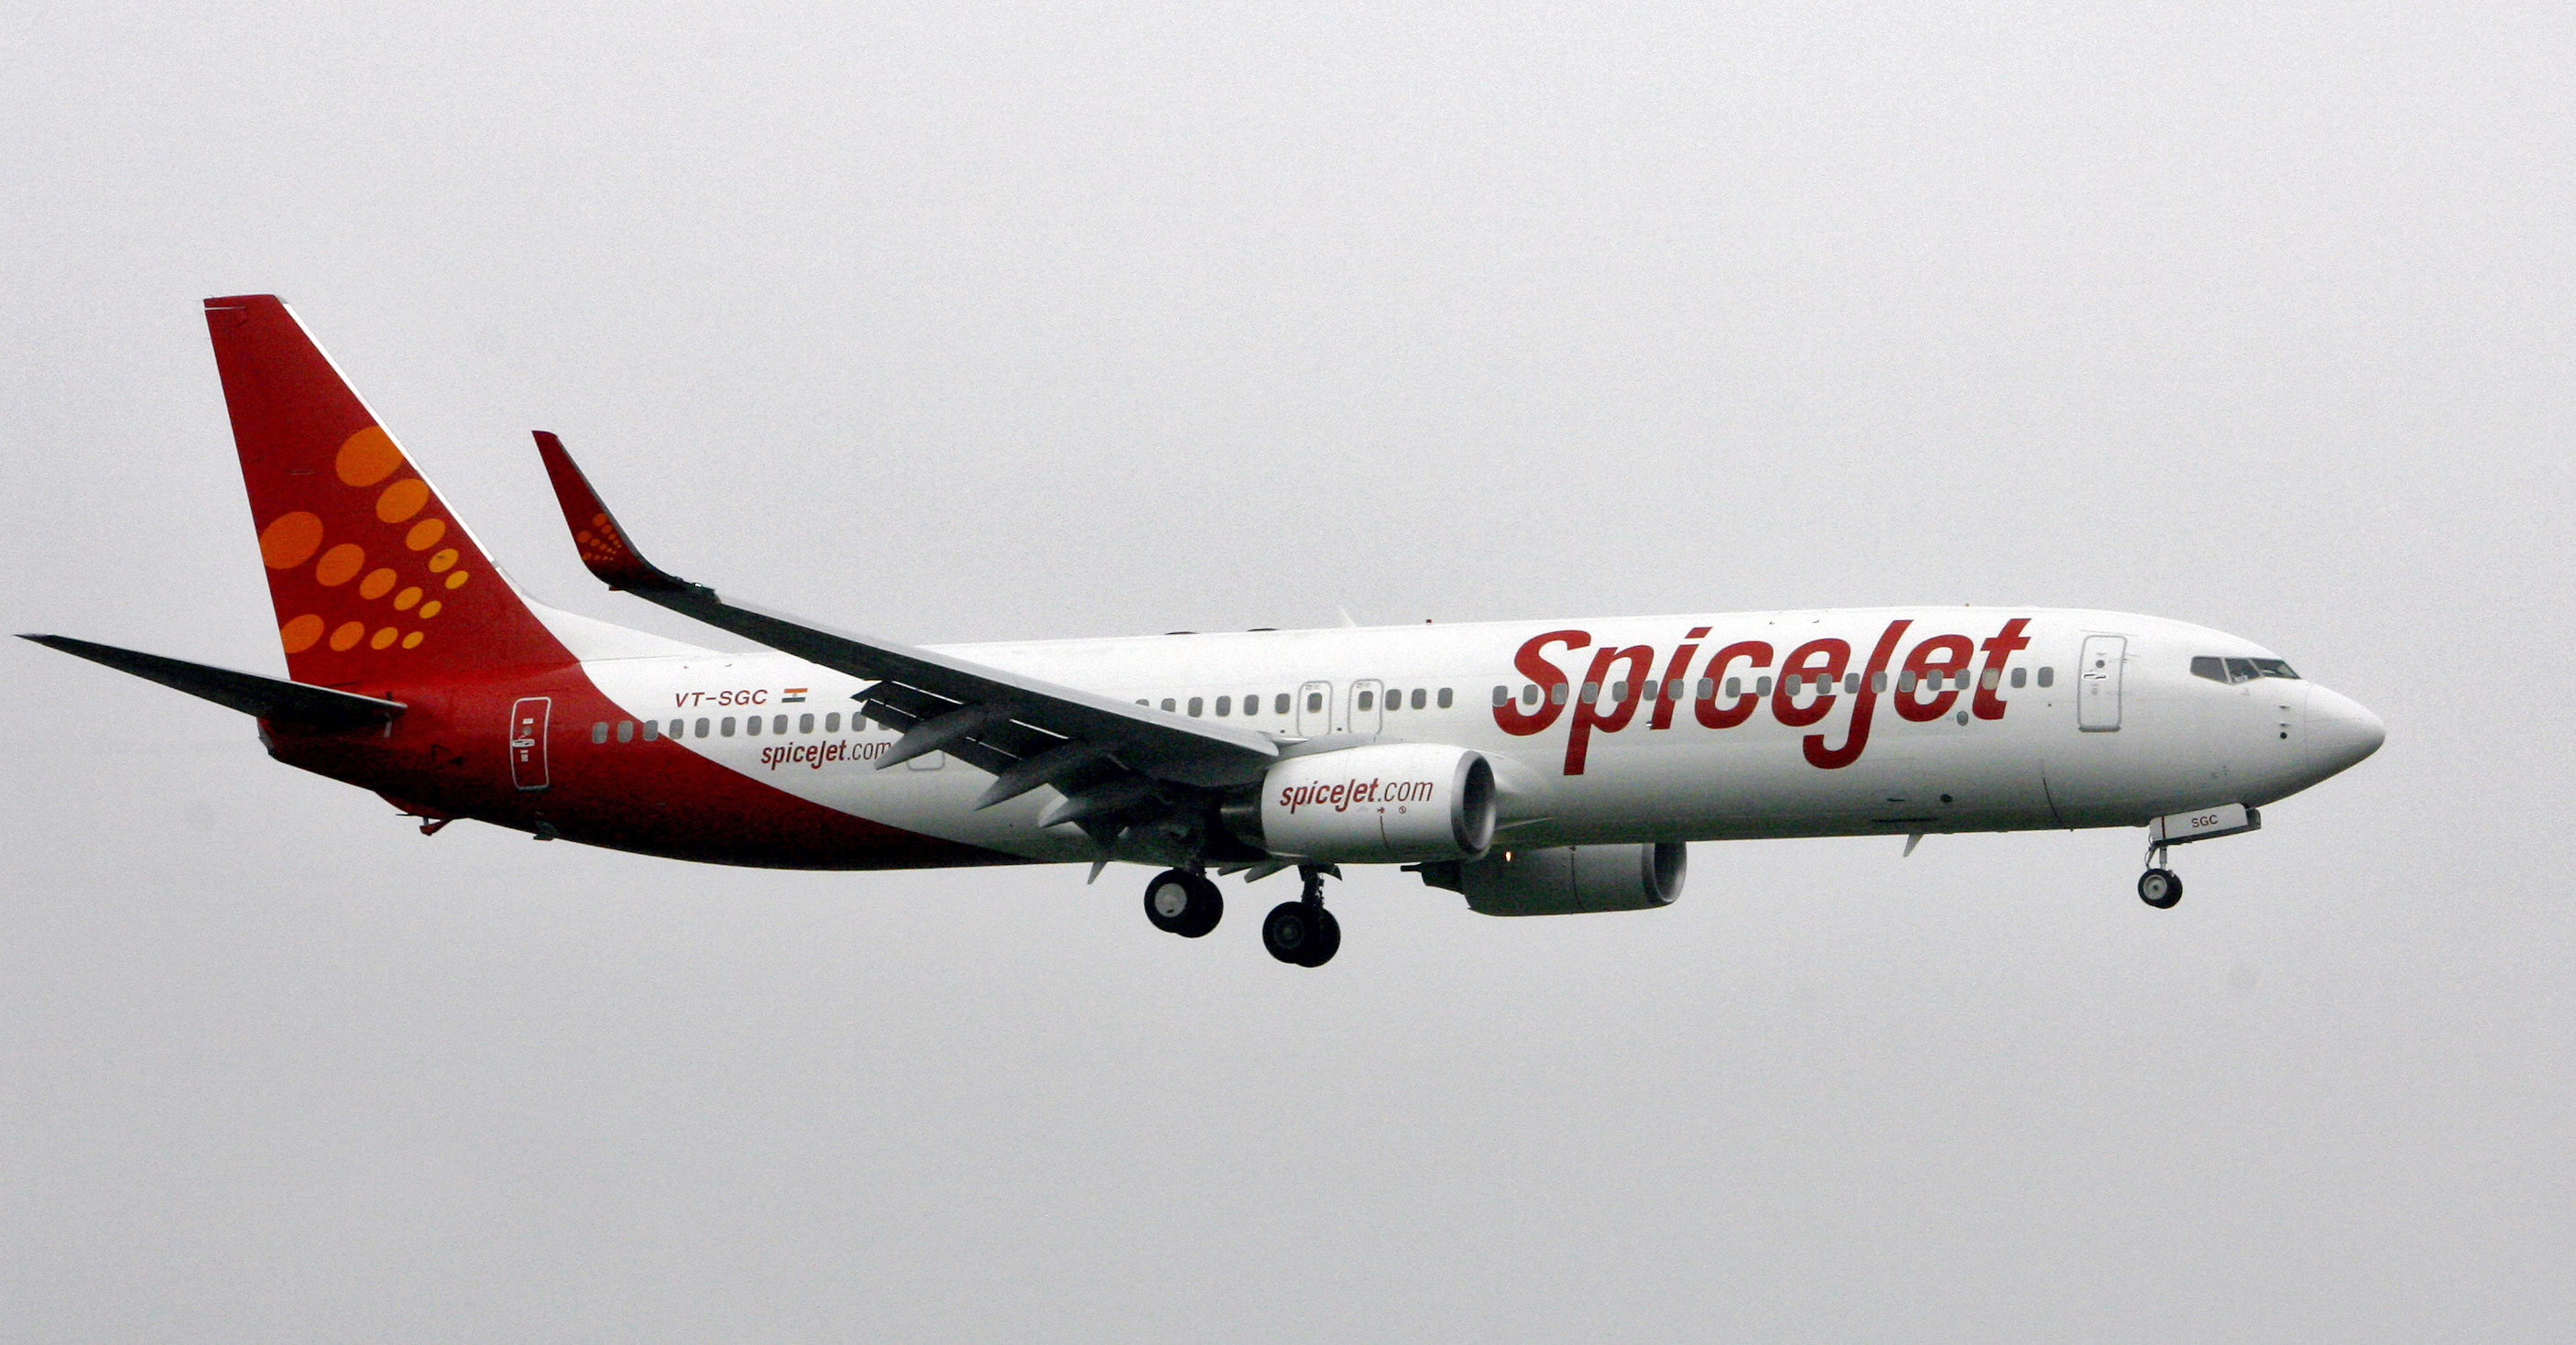 India's SpiceJet aircraft prepares for landing at the airport in Mumbai